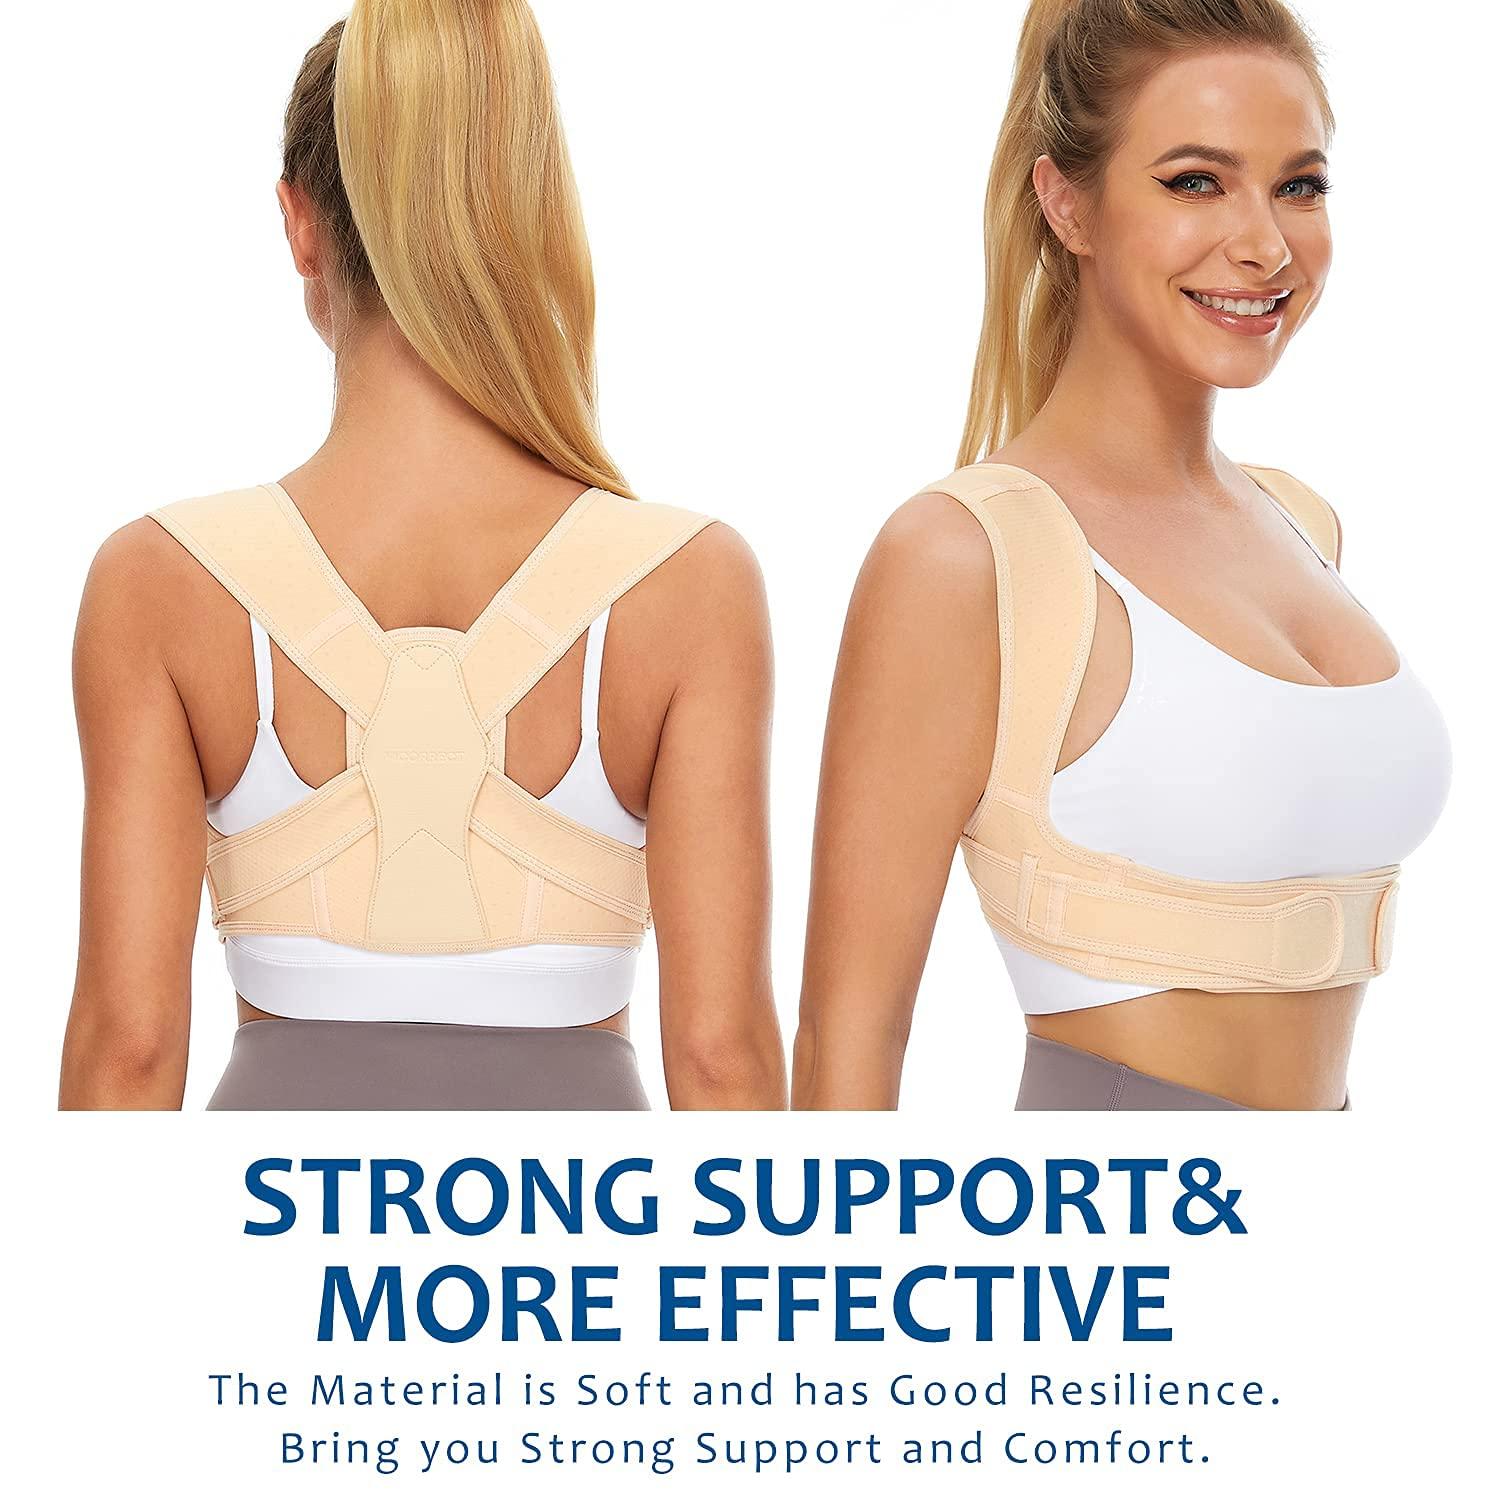 Vicorrect Posture Corrector for Women and Men, Adjustable Upper Back Brace  for Clavicle Support and Providing Pain Relief from Neck, Shoulder, and